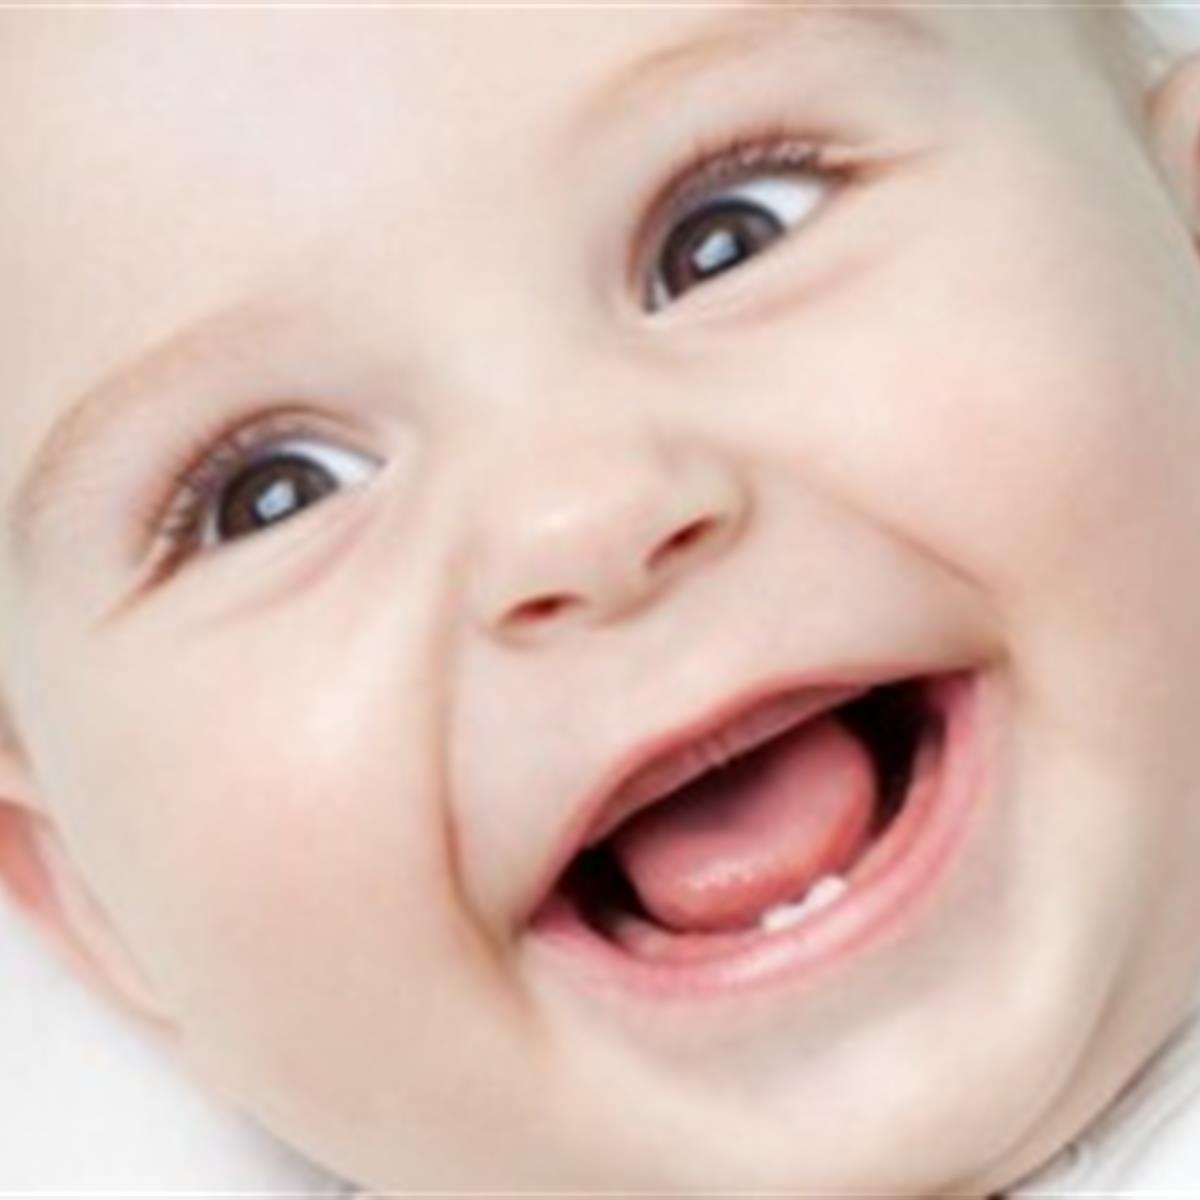 Baby Slow Teeth Development: What You Need to Know